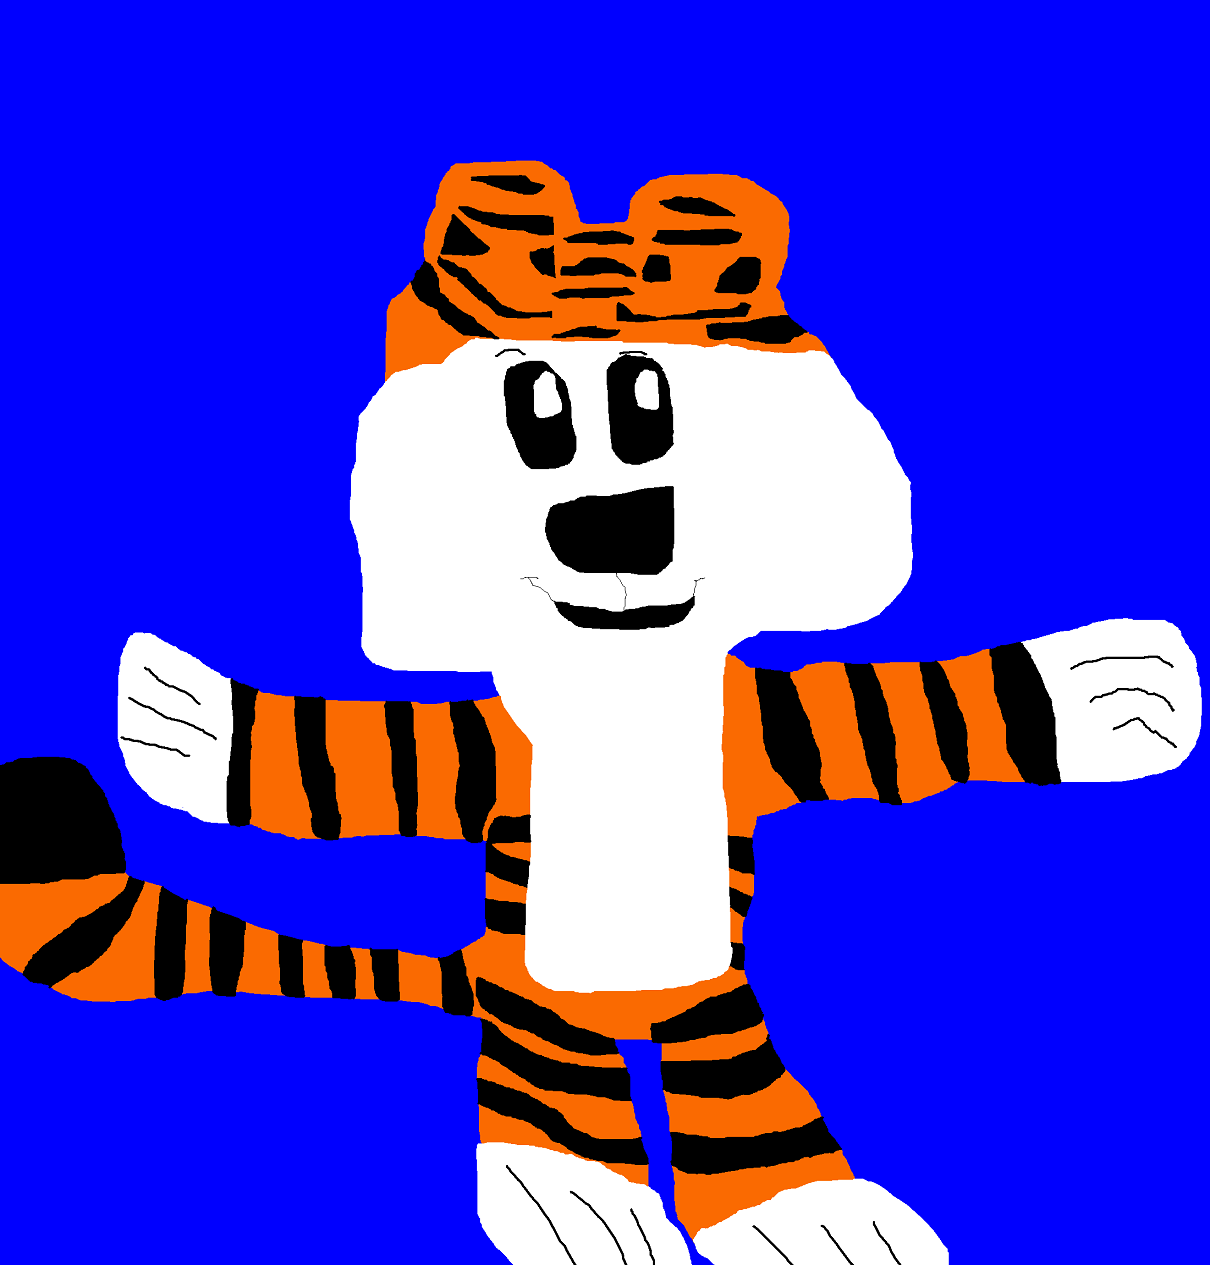 Hobbes Ms Paint New For 2014 by Falconlobo